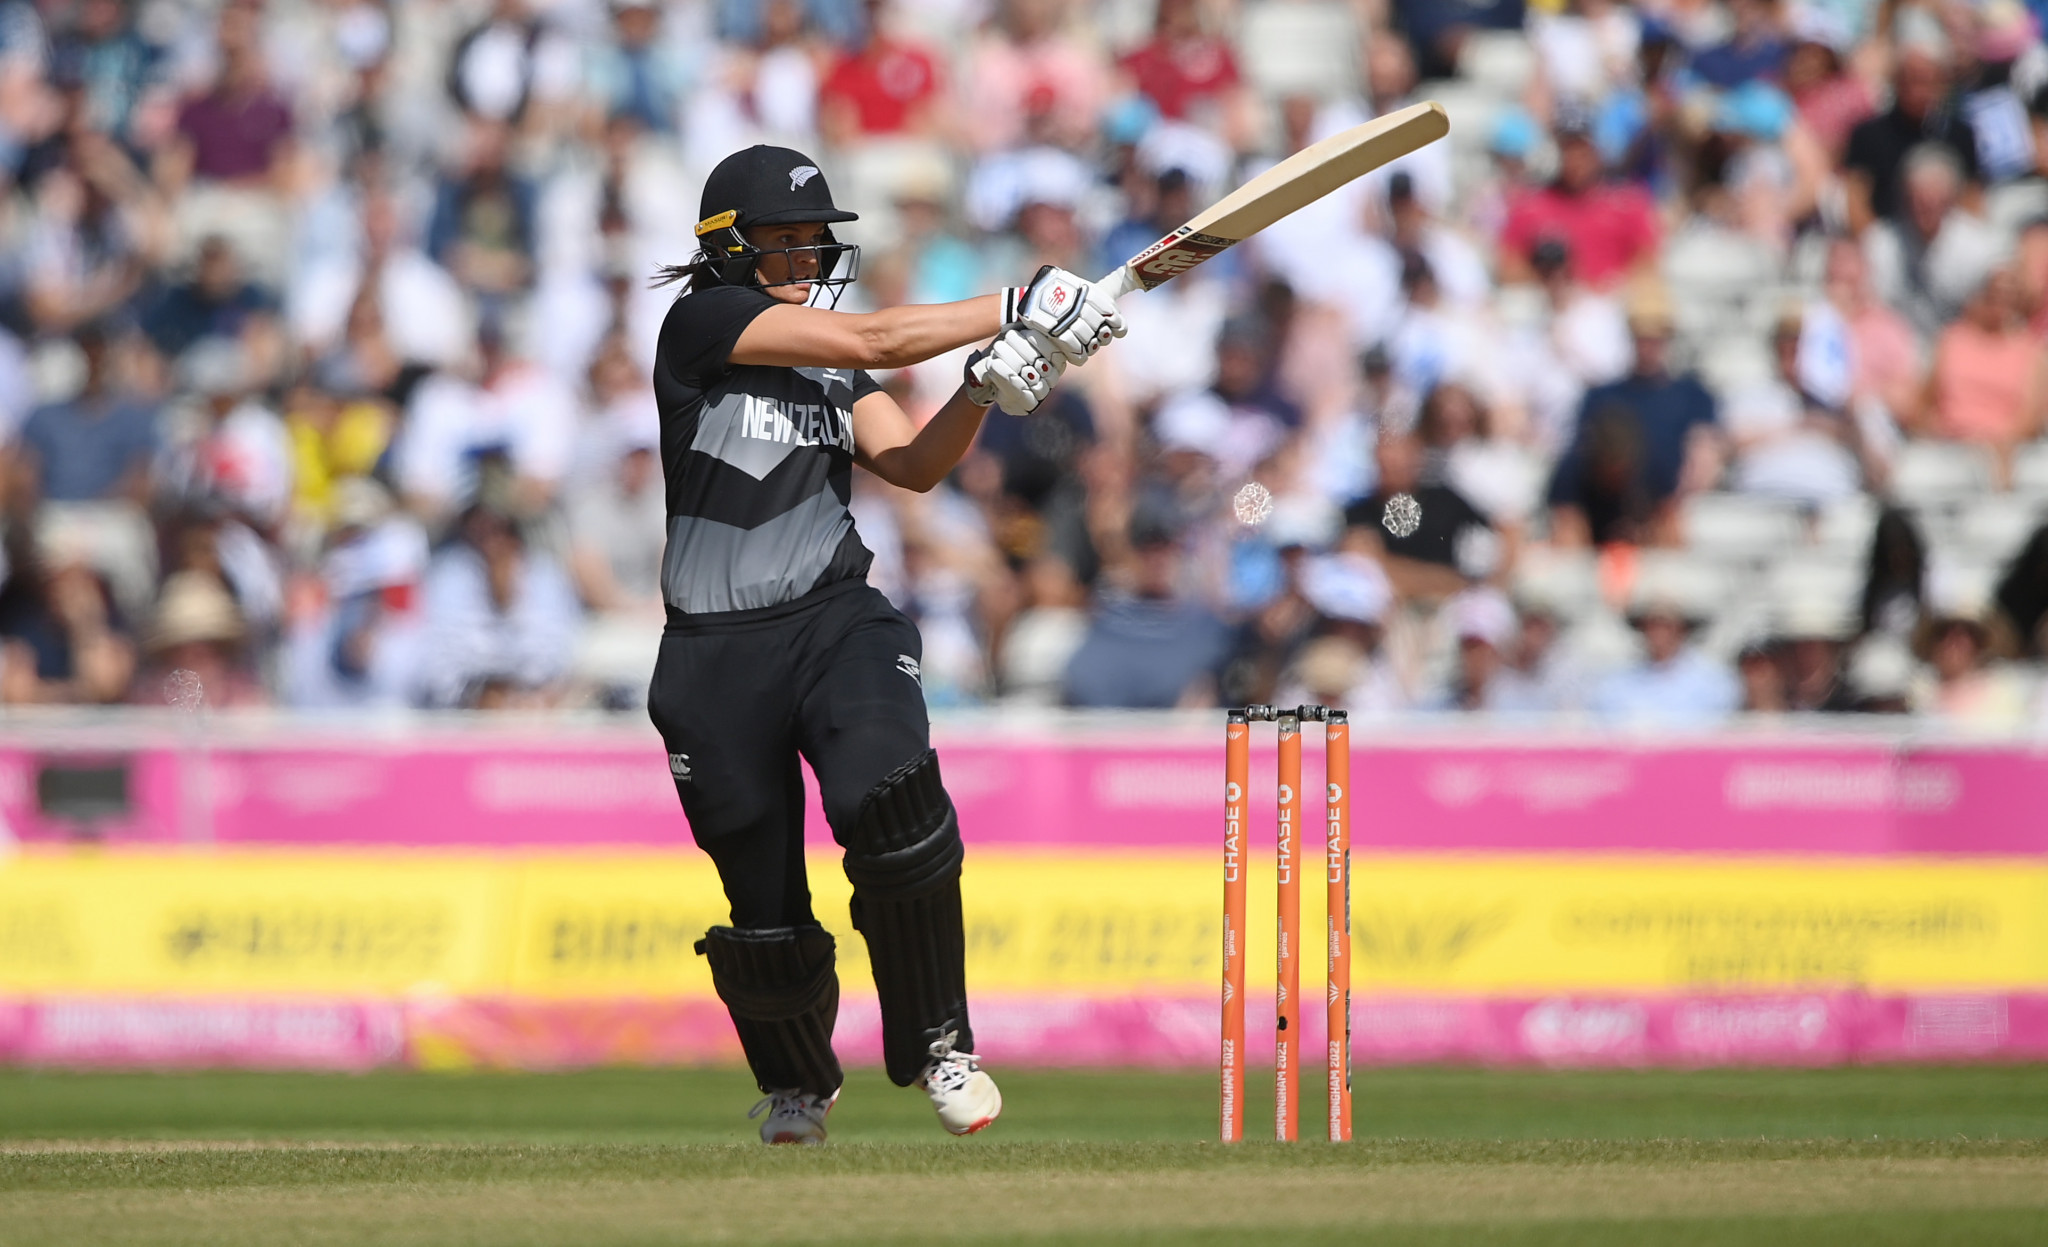 New Zealand's Suzie Bates made an unbeaten 91 which was the highest individual score of the Birmingham 2022 tournament ©Getty Images